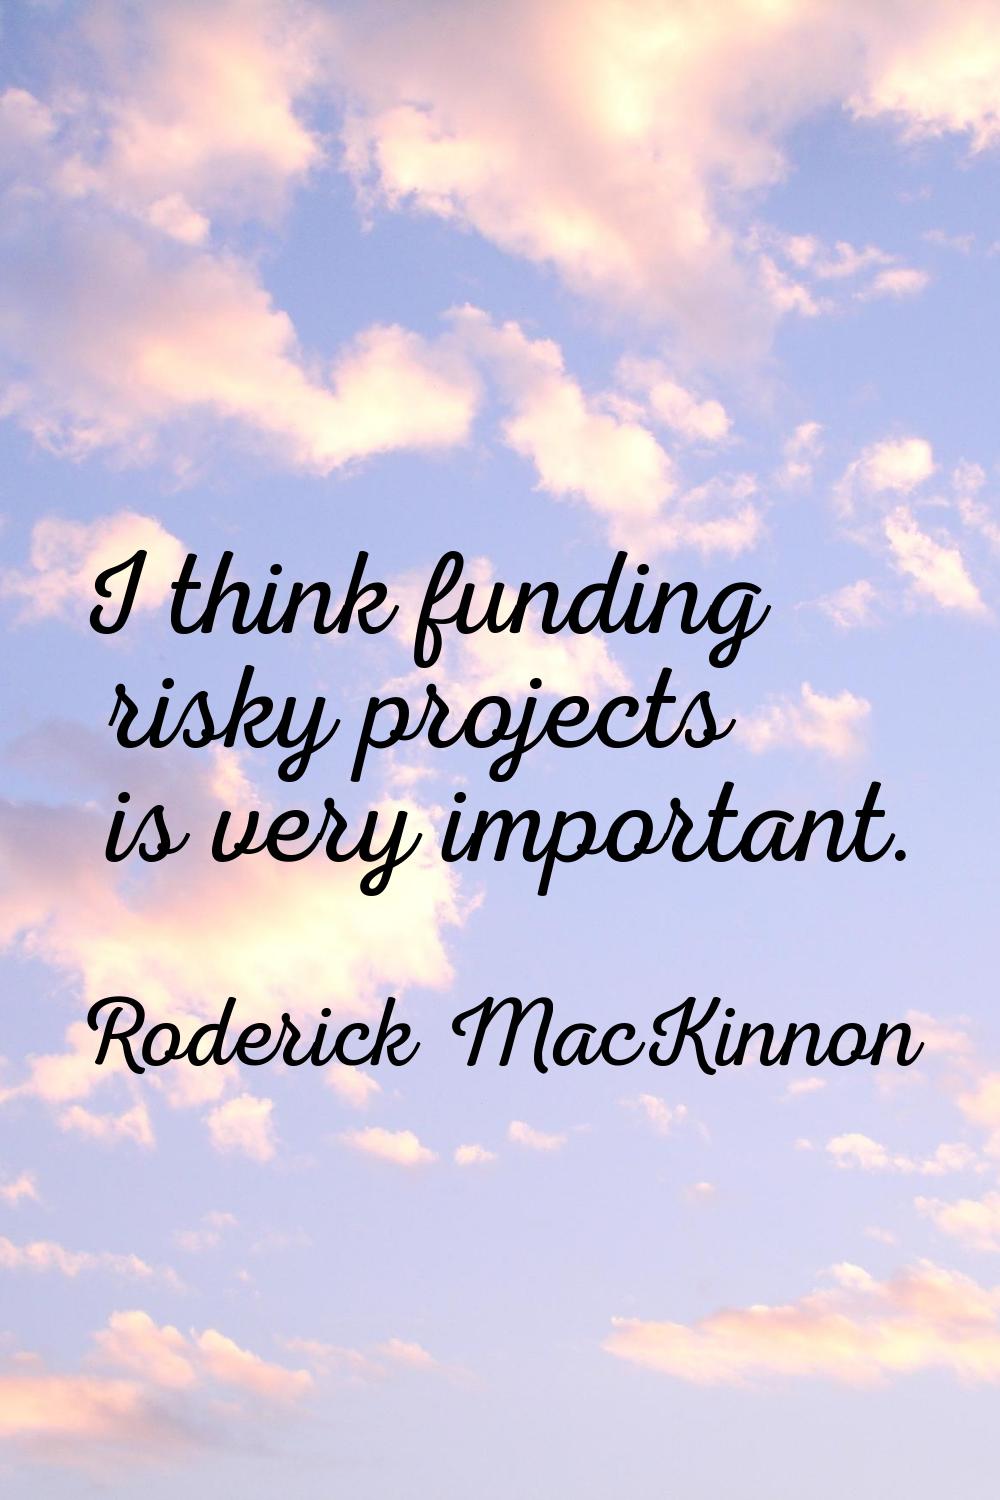 I think funding risky projects is very important.